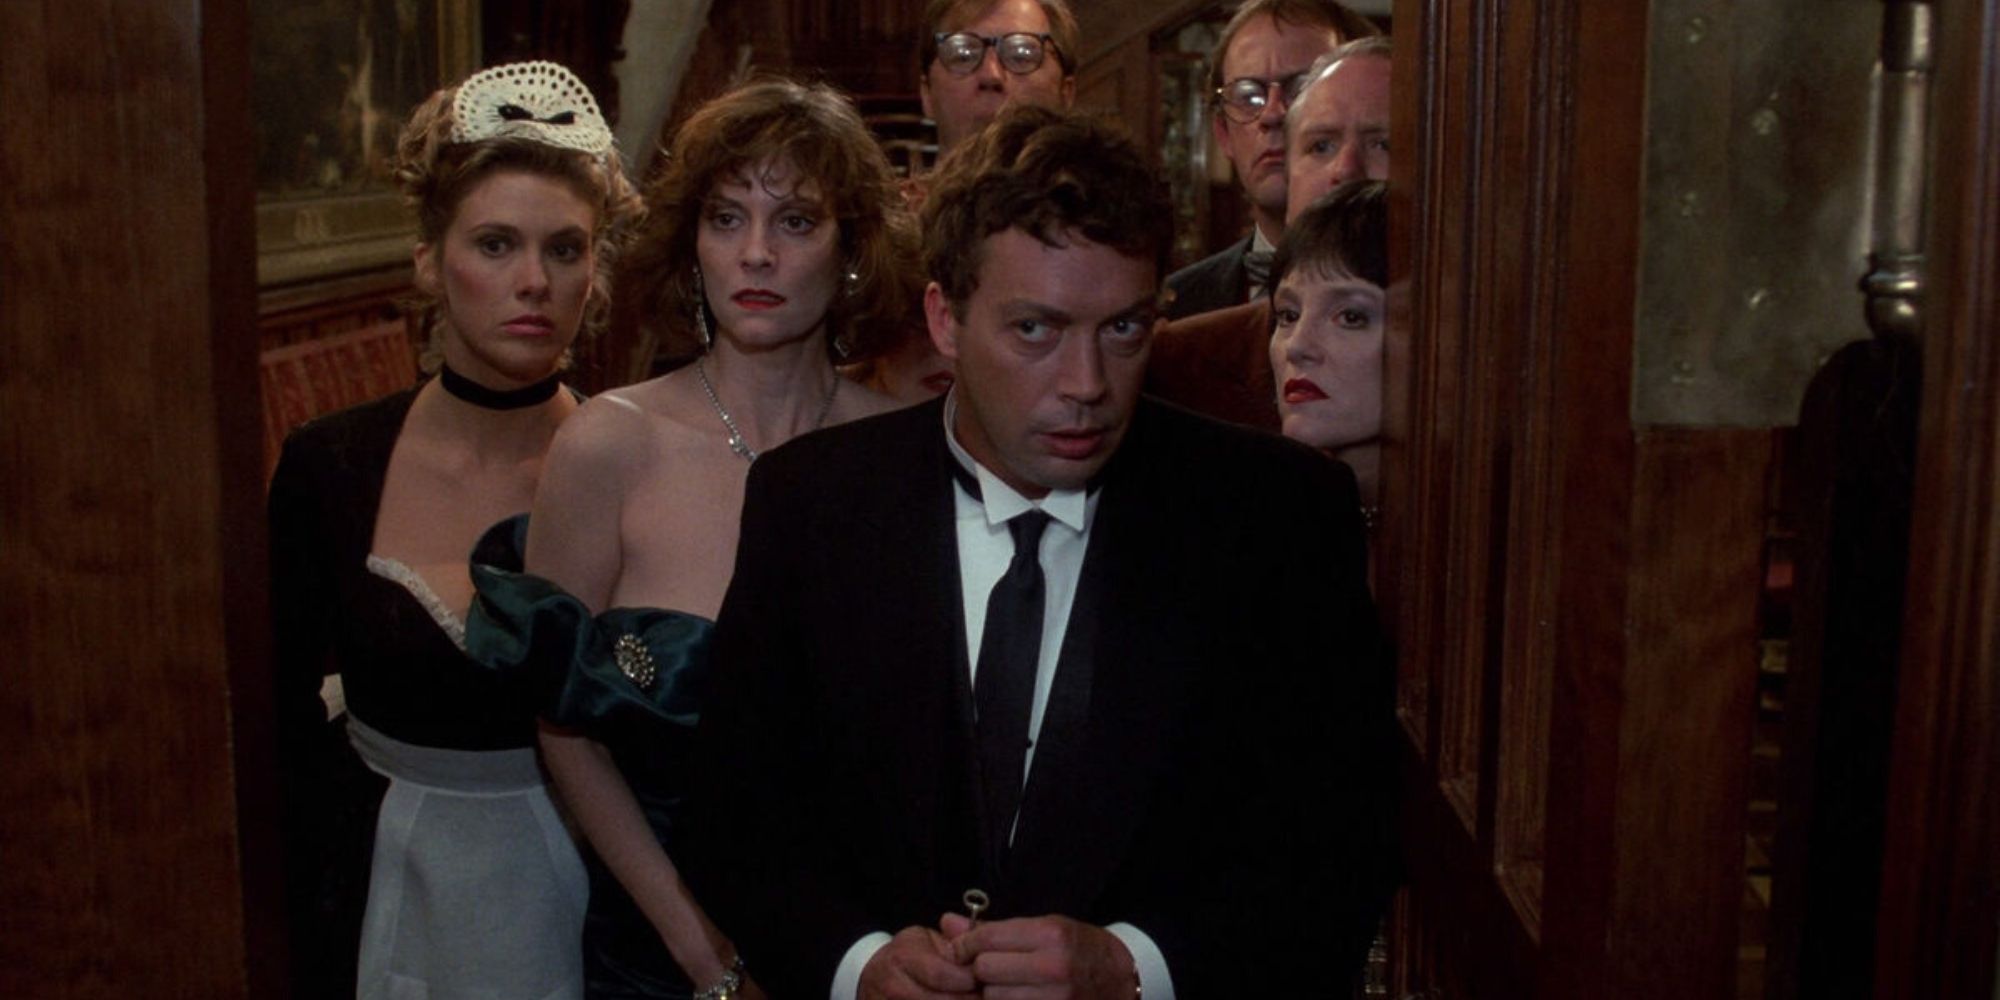 Wadsworth, Yvette and guests in Clue